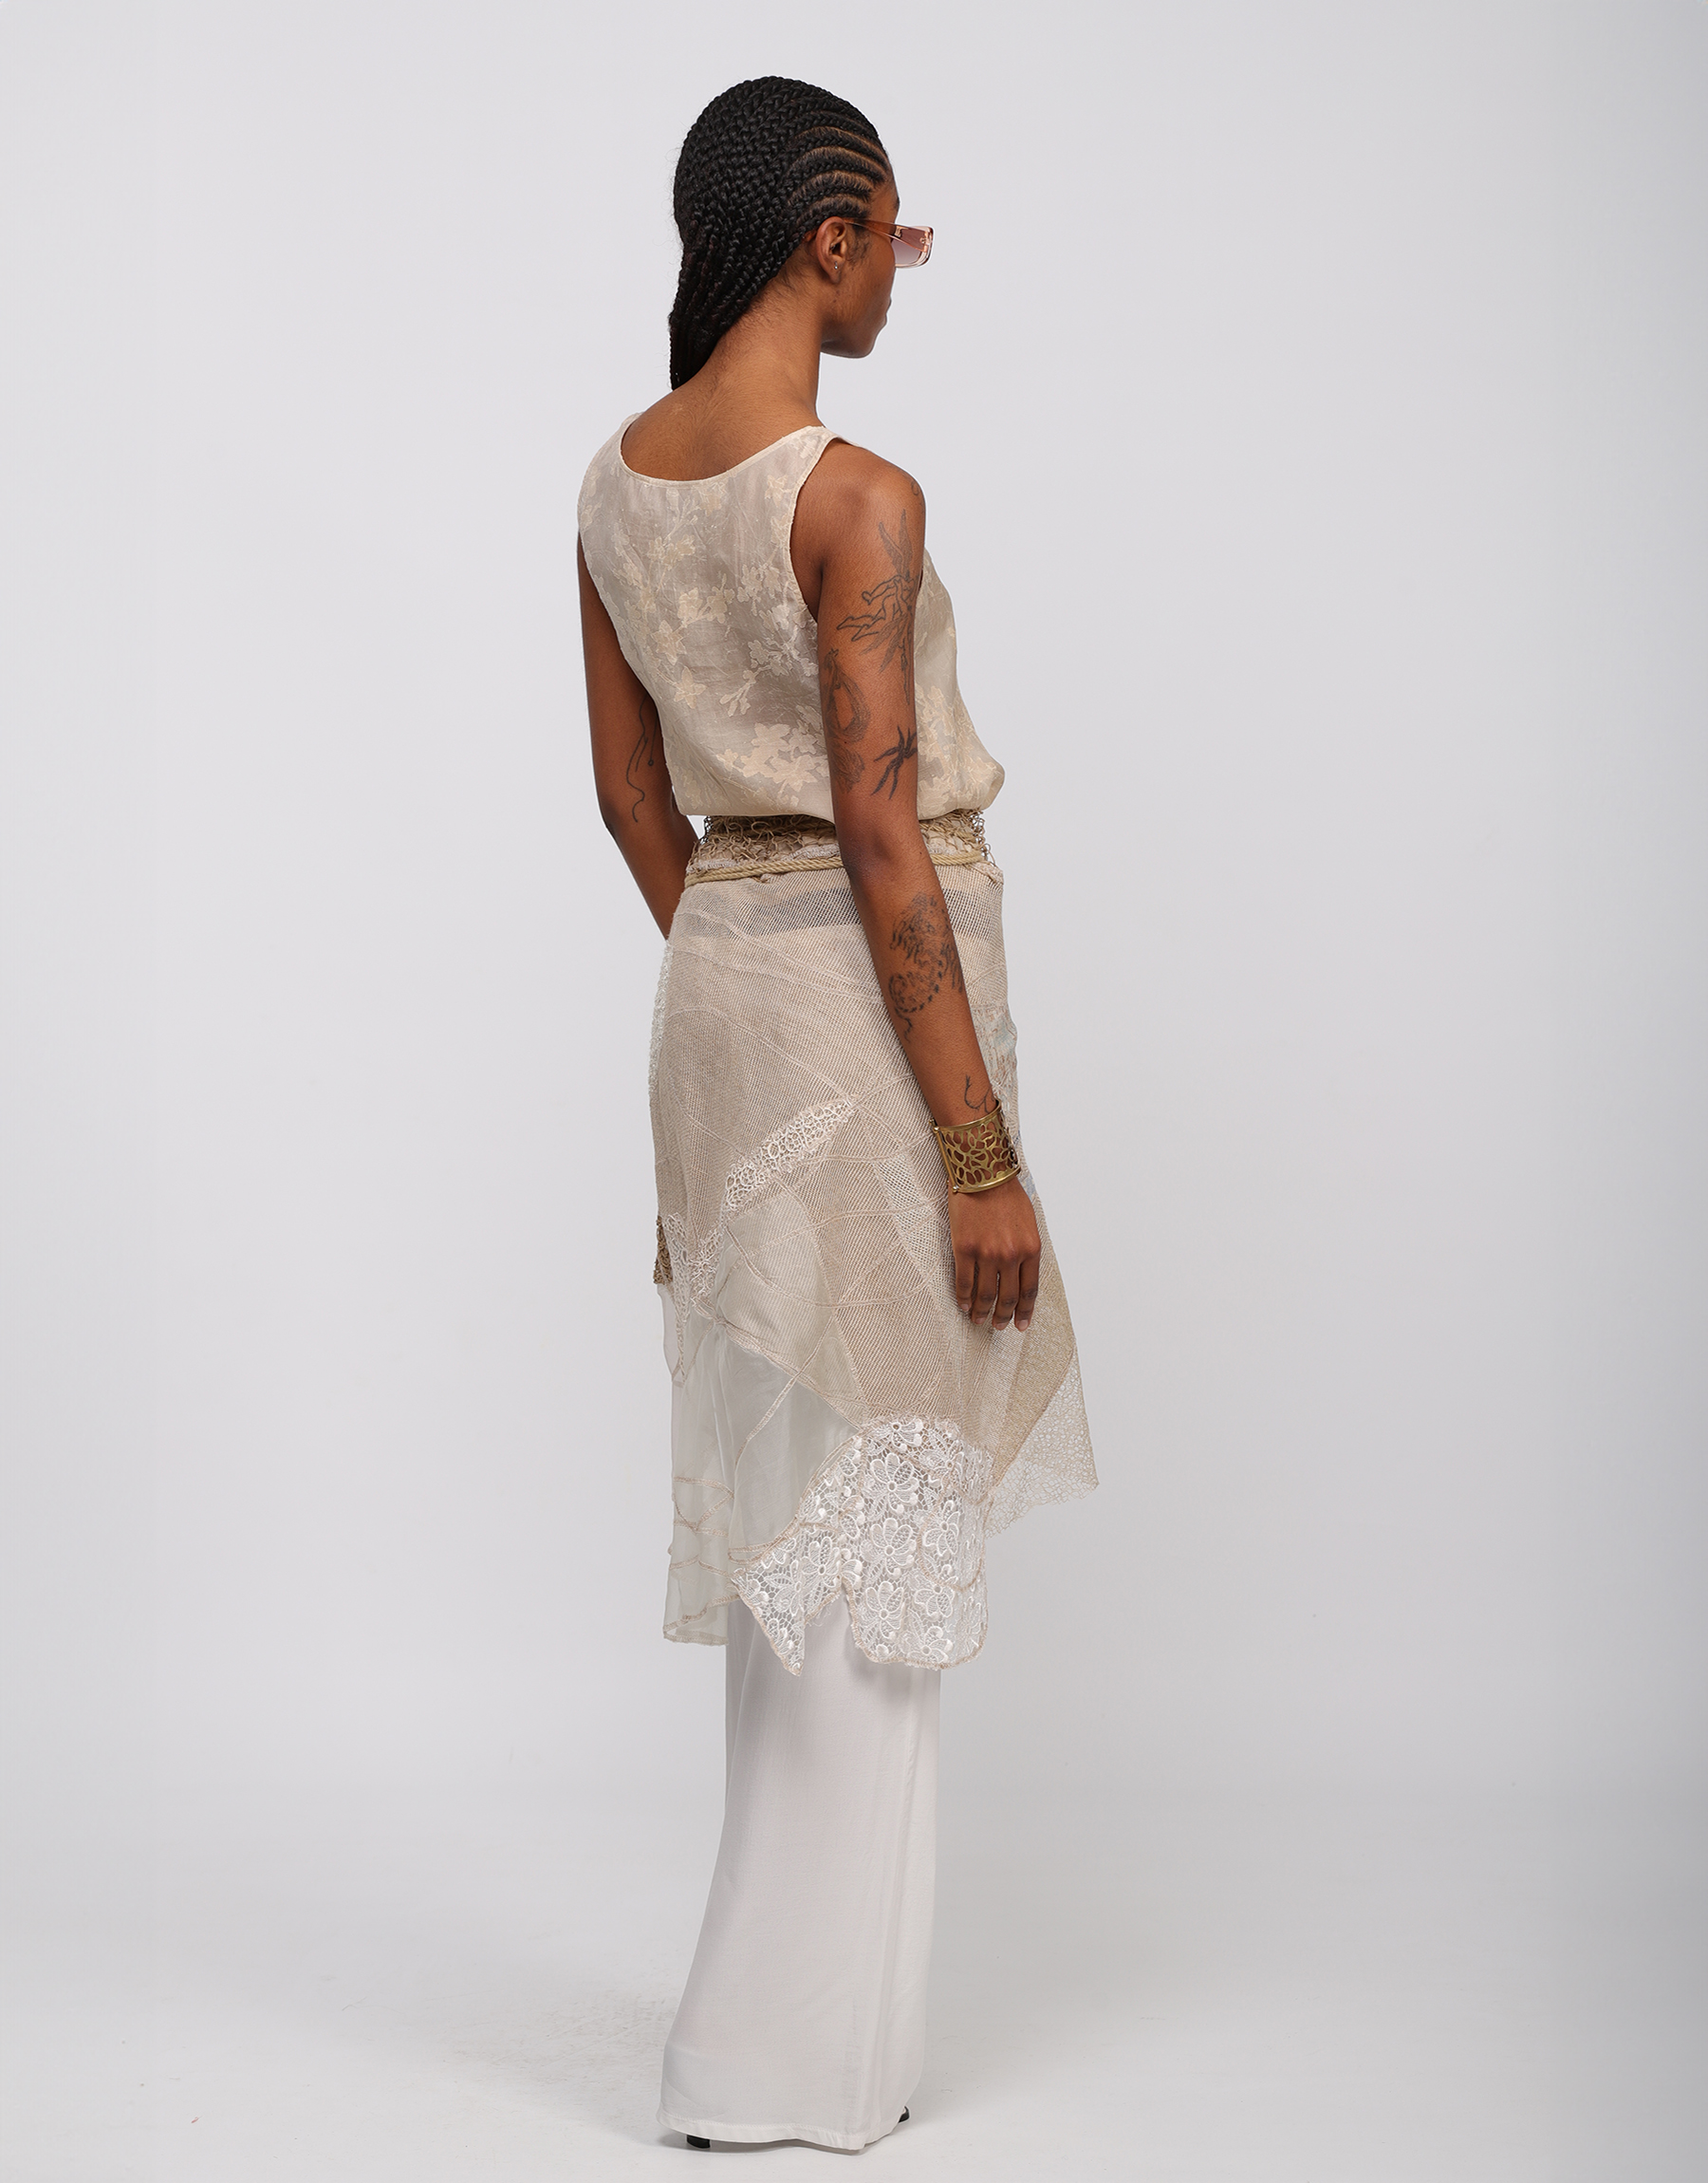 Wrap skirt in beige, ivory embroidered patchwork mesh and knitted string